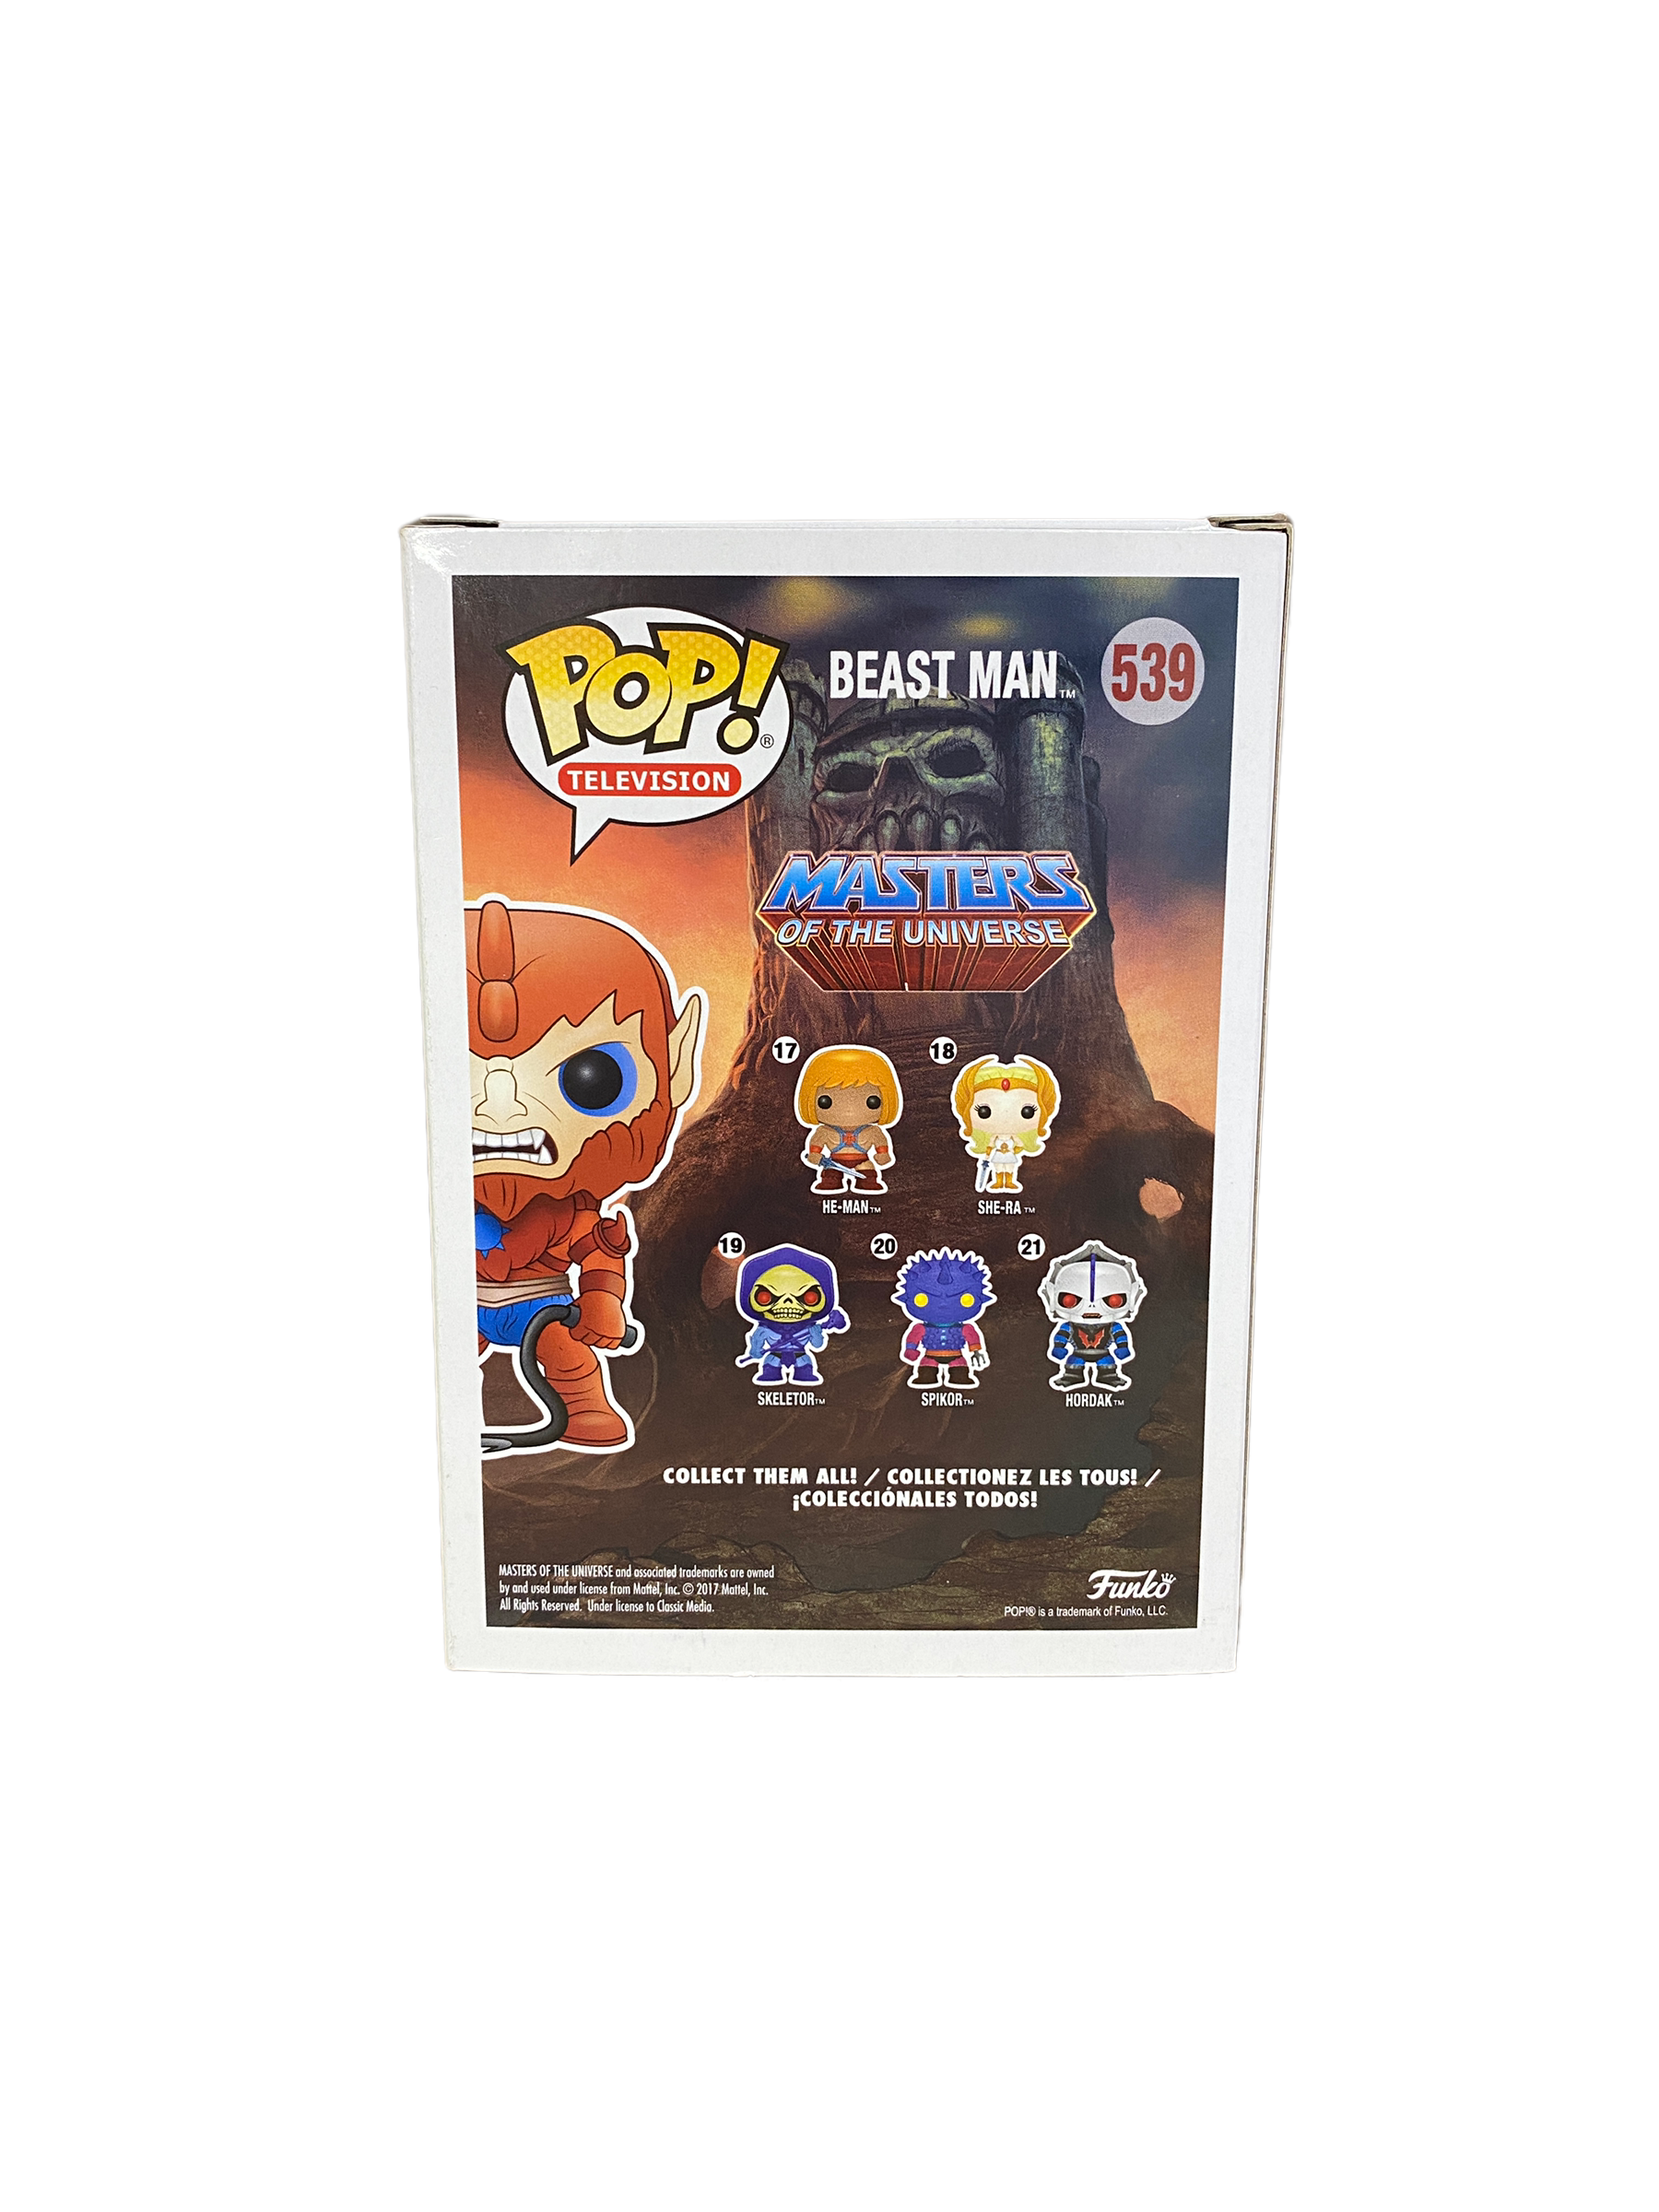 Beast Man #539 (Flocked) Funko Pop! - Masters Of The Universe - NYCC 2017 Official Convention Exclusive - Condition 8.75/10